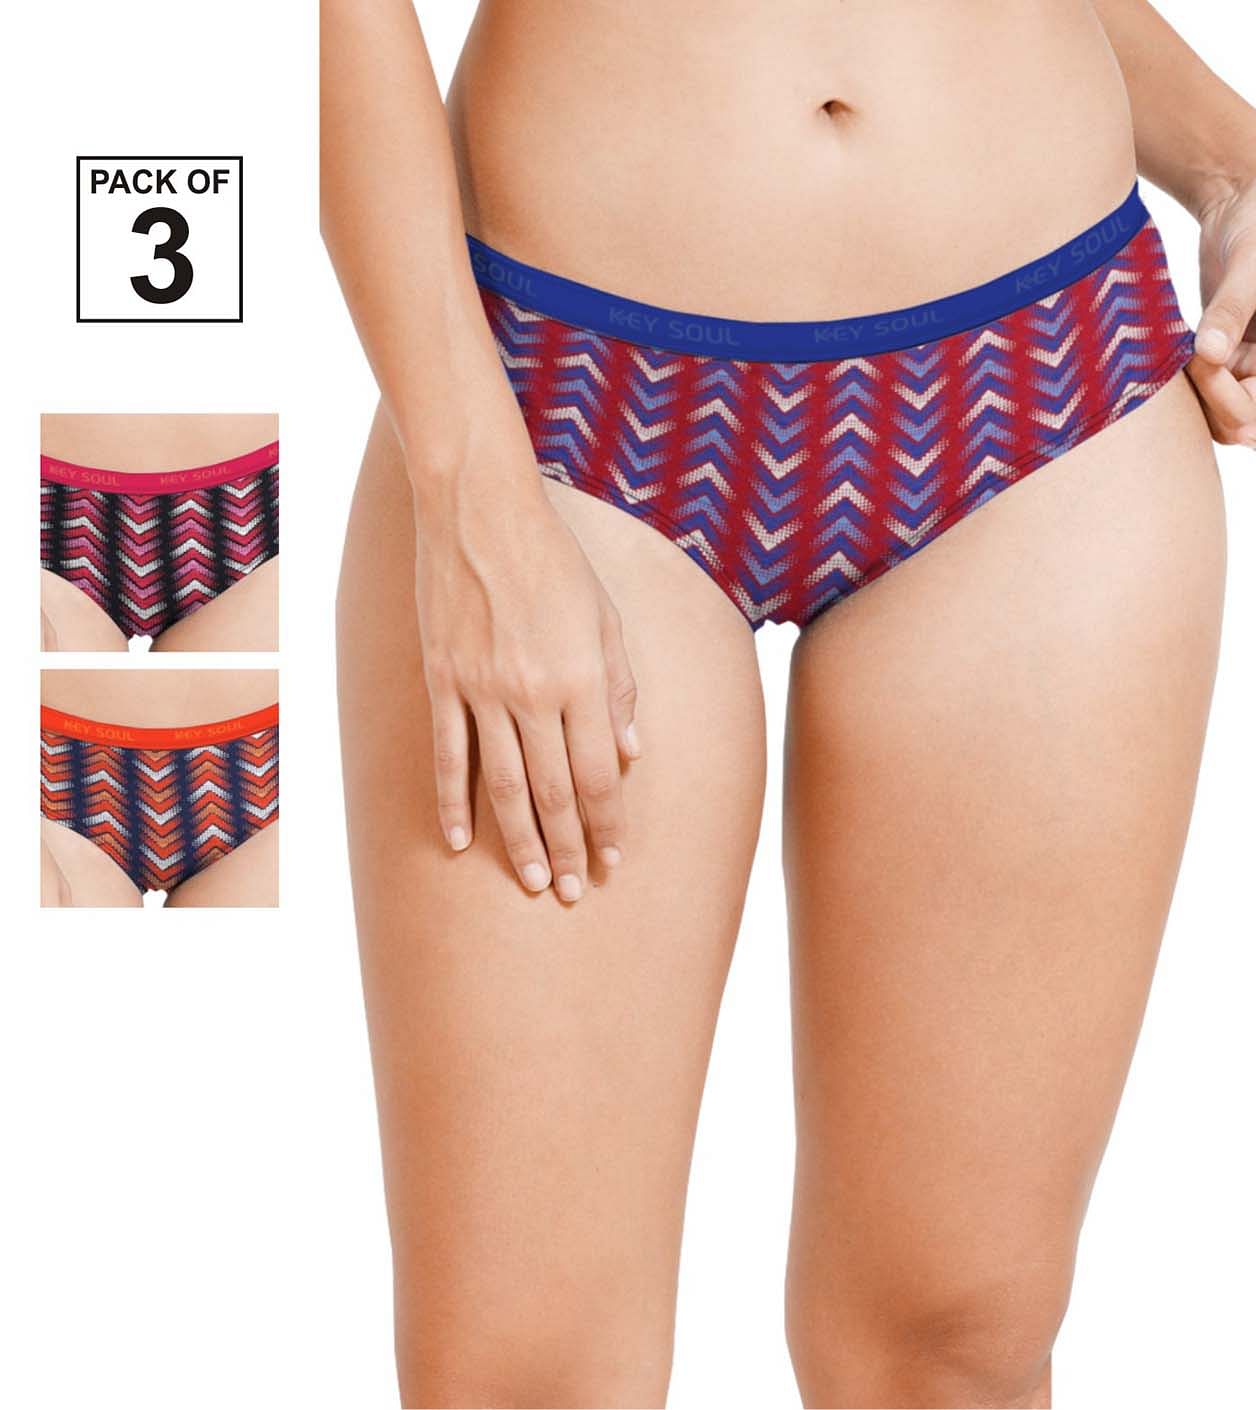 Printed Outer Elastic Panty Pack of 3 - KS002 - Pack - 28 - 3xl/105